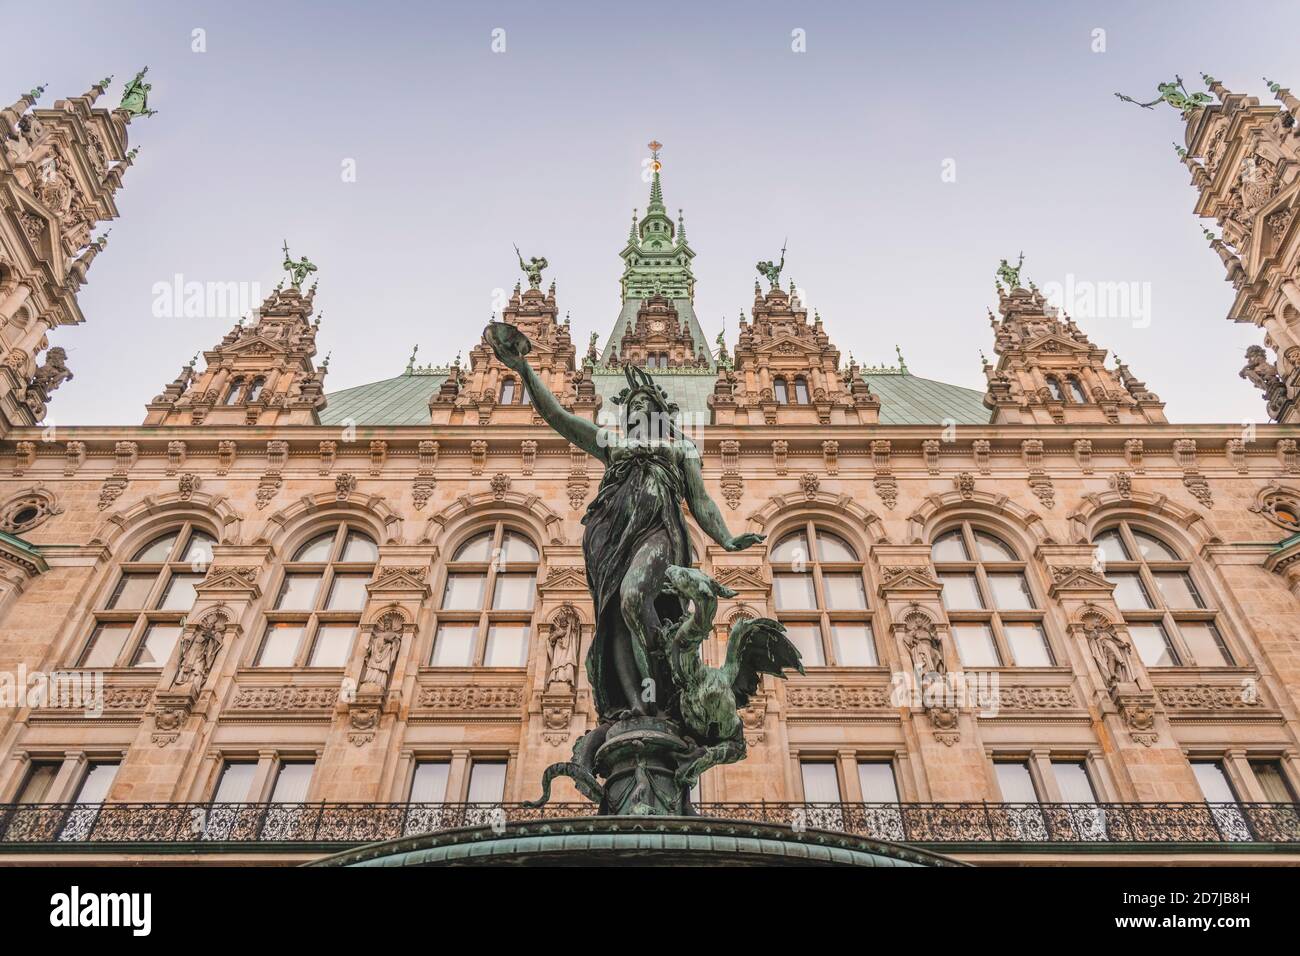 Germany, Hamburg, Hygieia statue in front of town hall facade Stock Photo